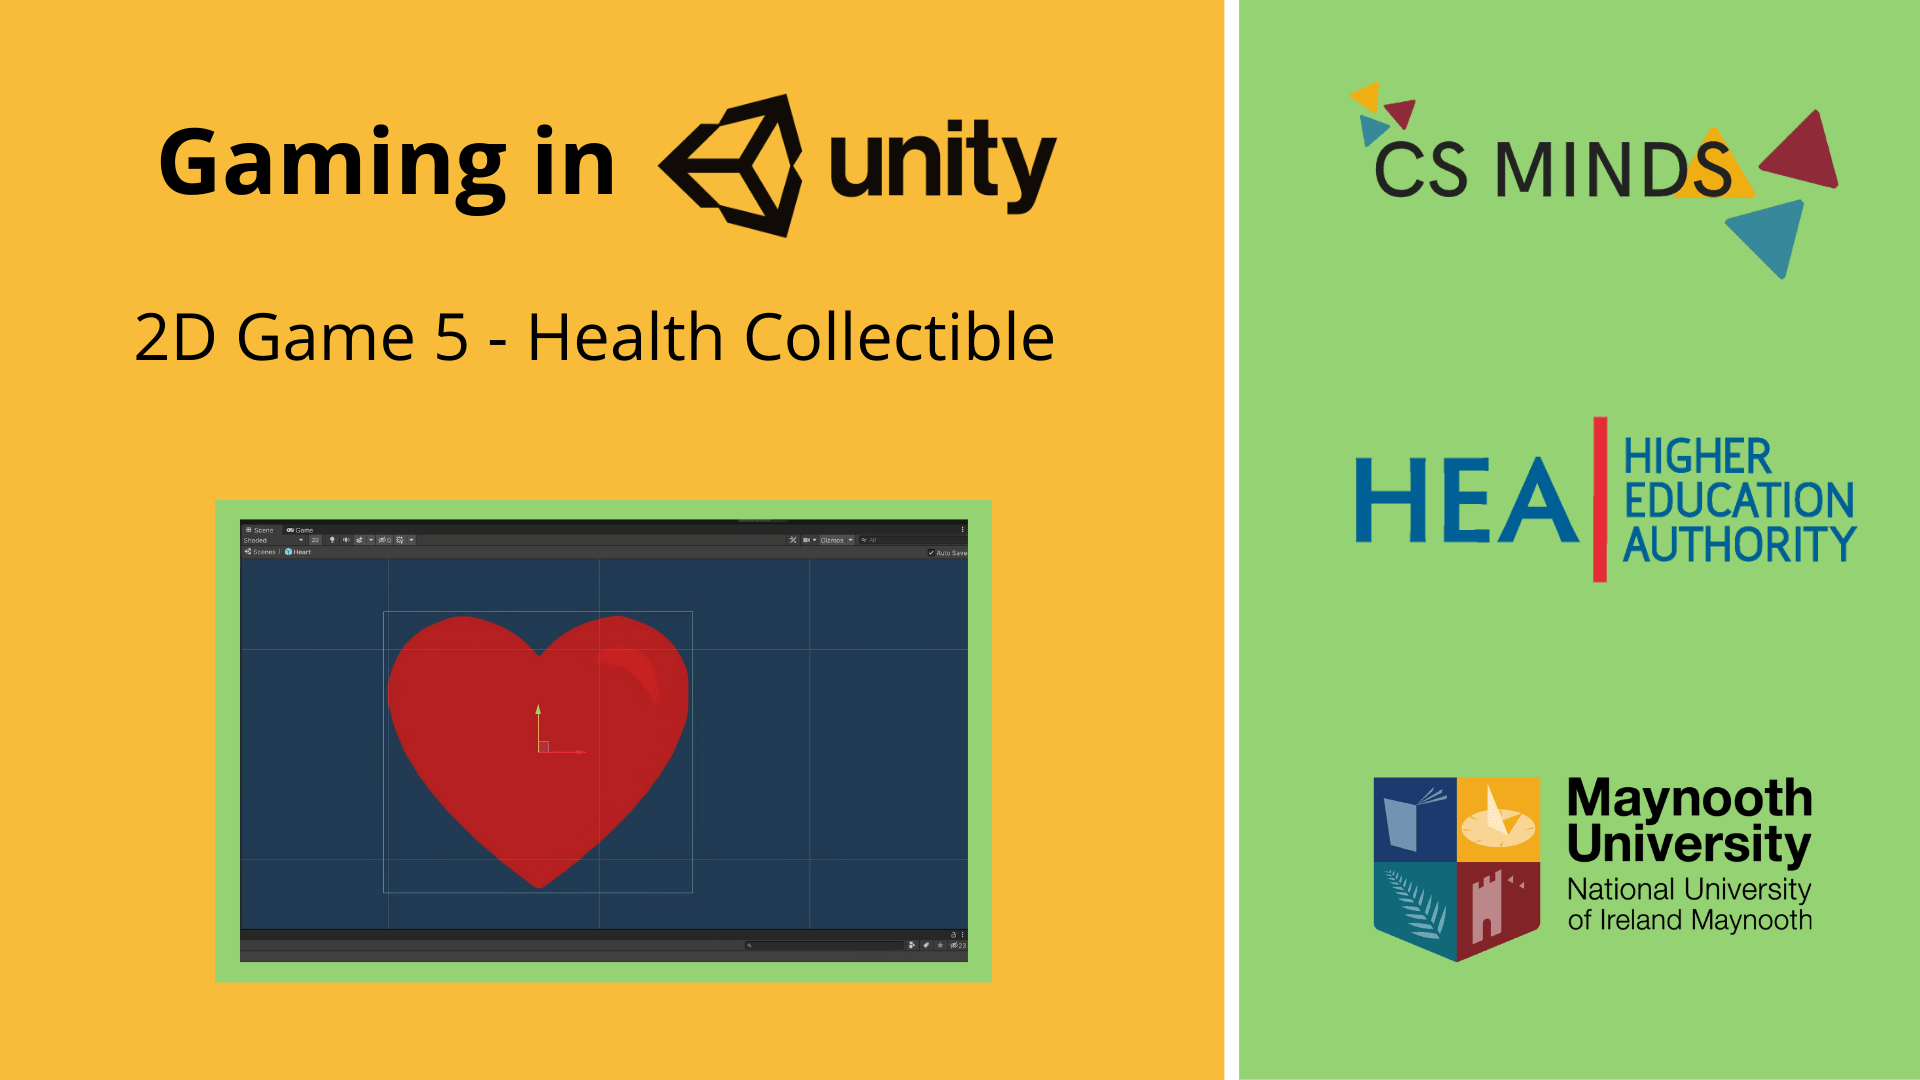 (../img/unity-9-2d-game-5-health-collectible/2d-game-5-health-collectible-header.png)